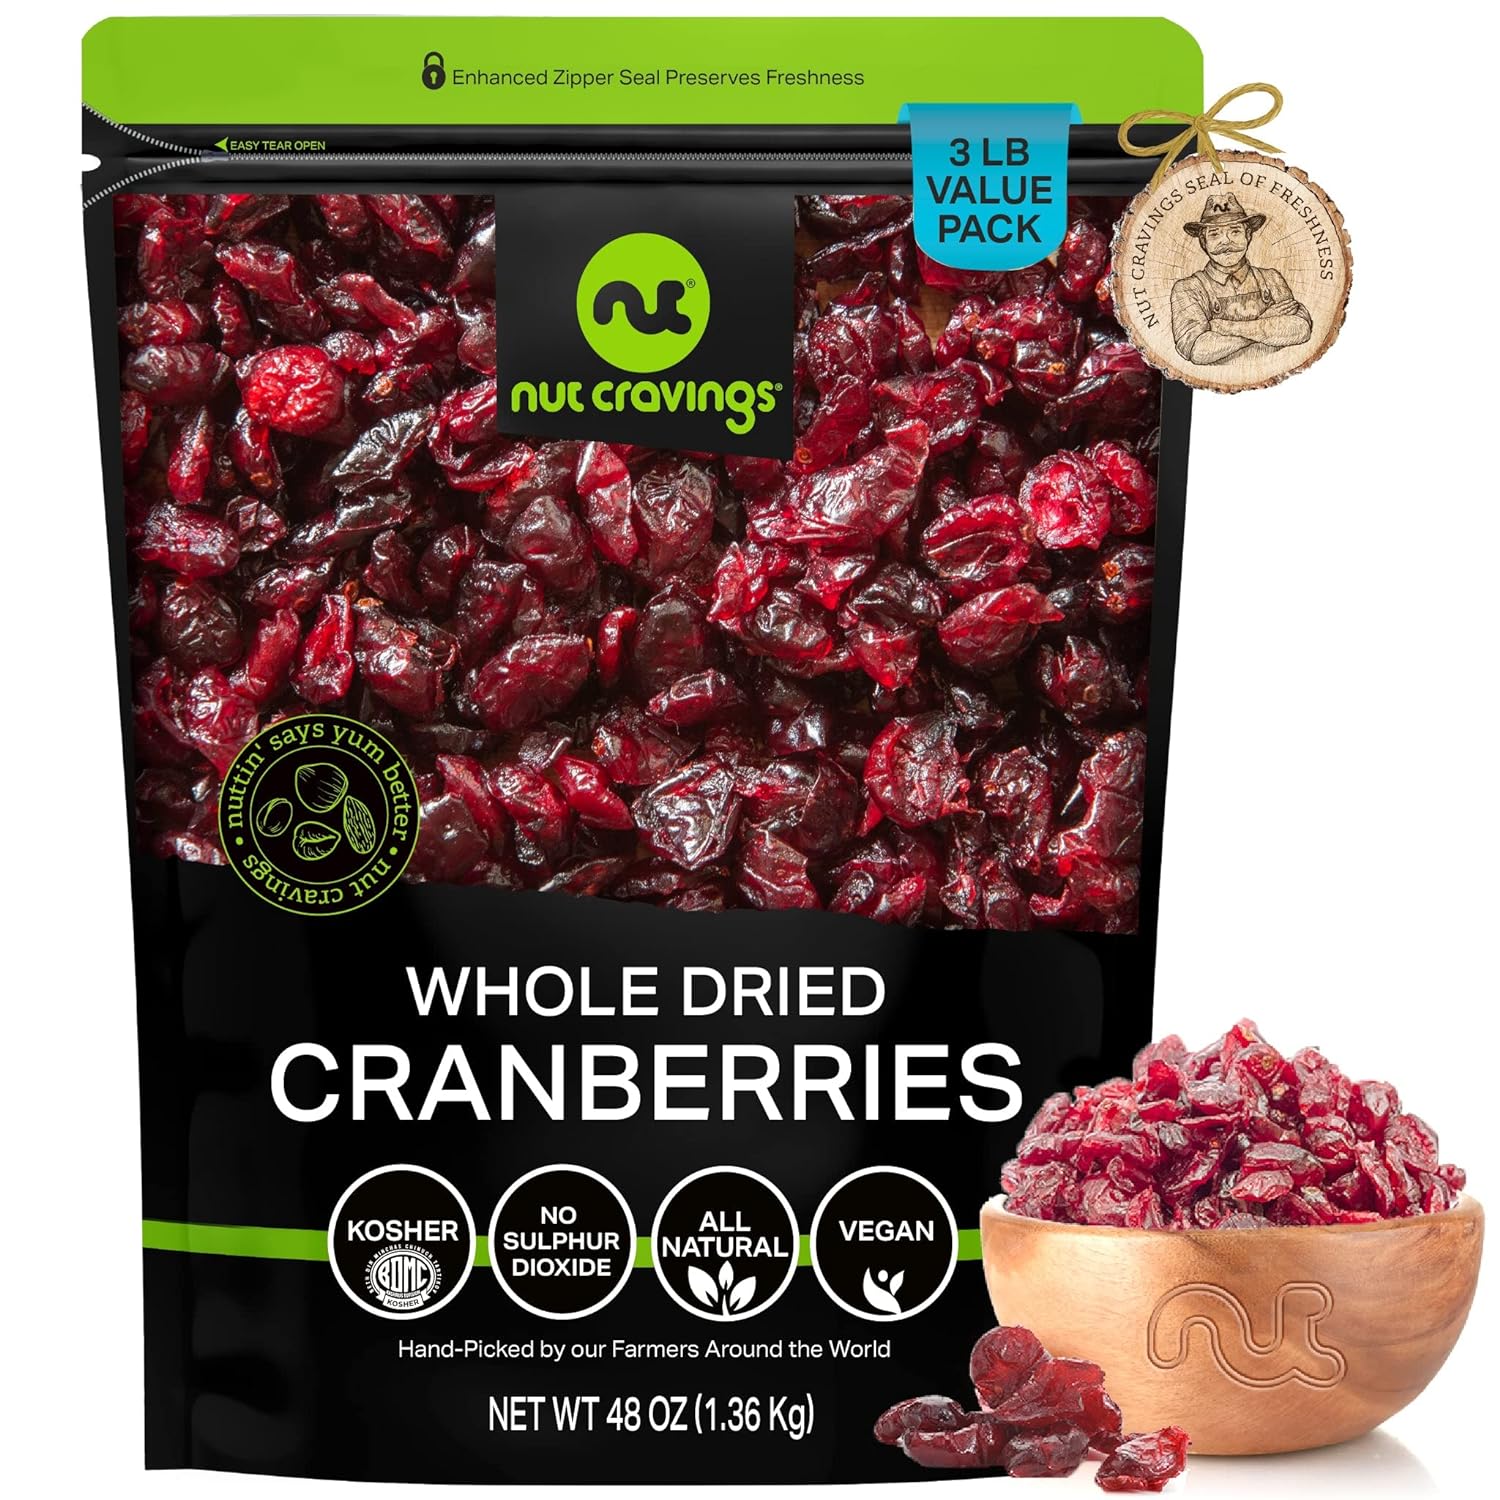 Nut Cravings Dry Fruits - Sun Dried Whole Cranberries, Lightly Sweetened (48oz - 3 LB) Packed Fresh in Resealable Bag - Sweet Snack, Healthy Food, All Natural, Vegan, Kosher Certified